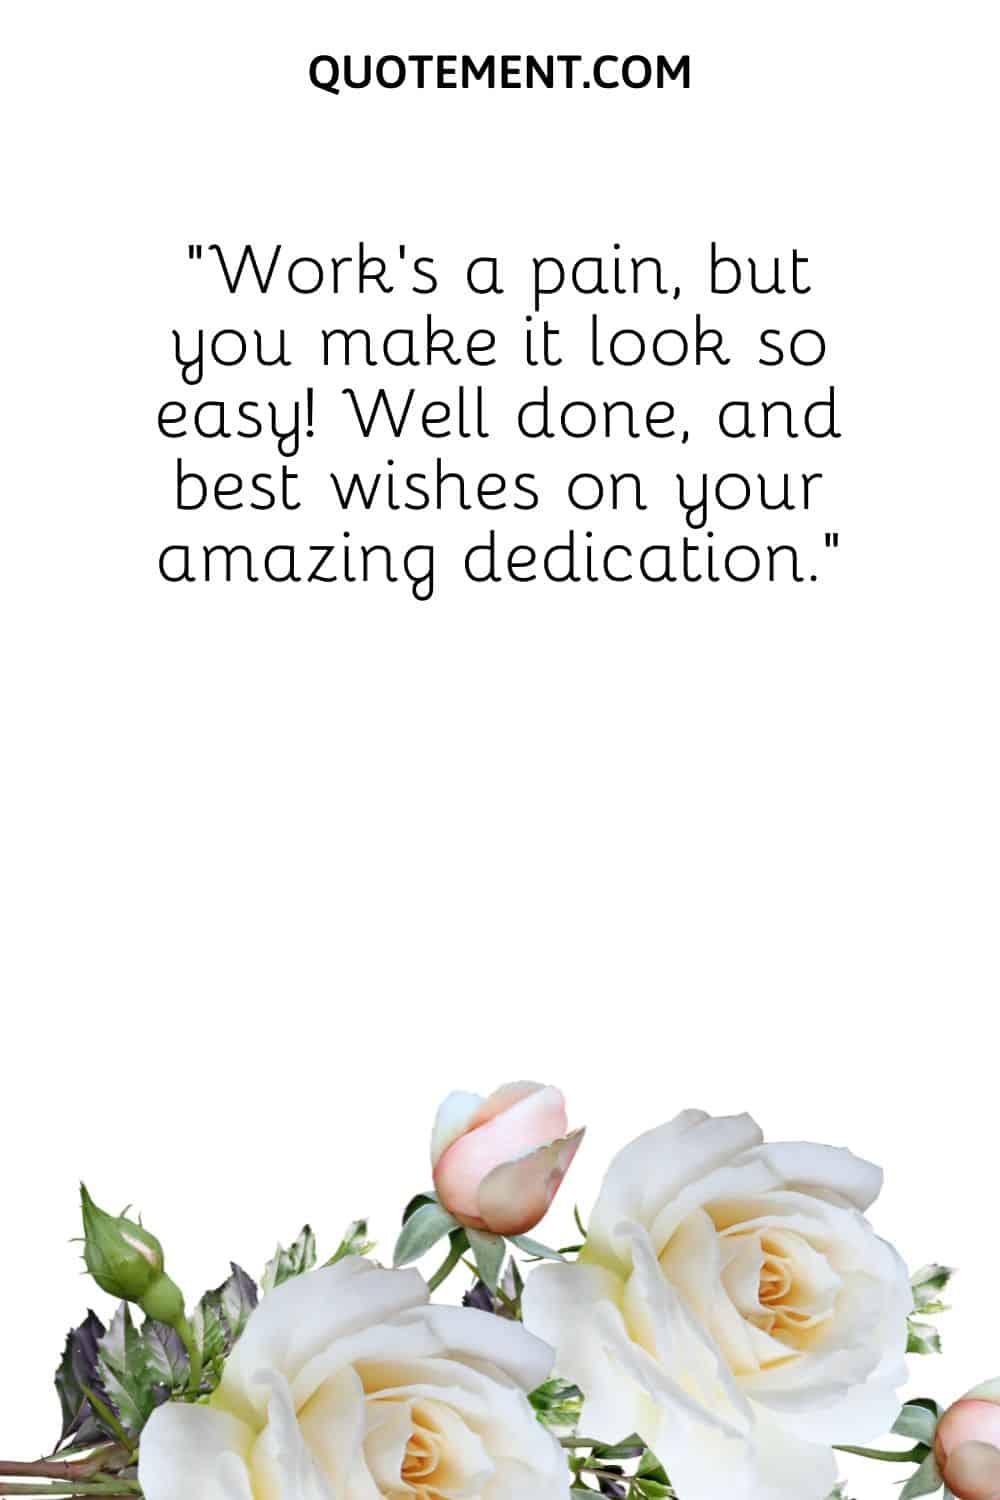 “Work’s a pain, but you make it look so easy! Well done, and best wishes on your amazing dedication.”